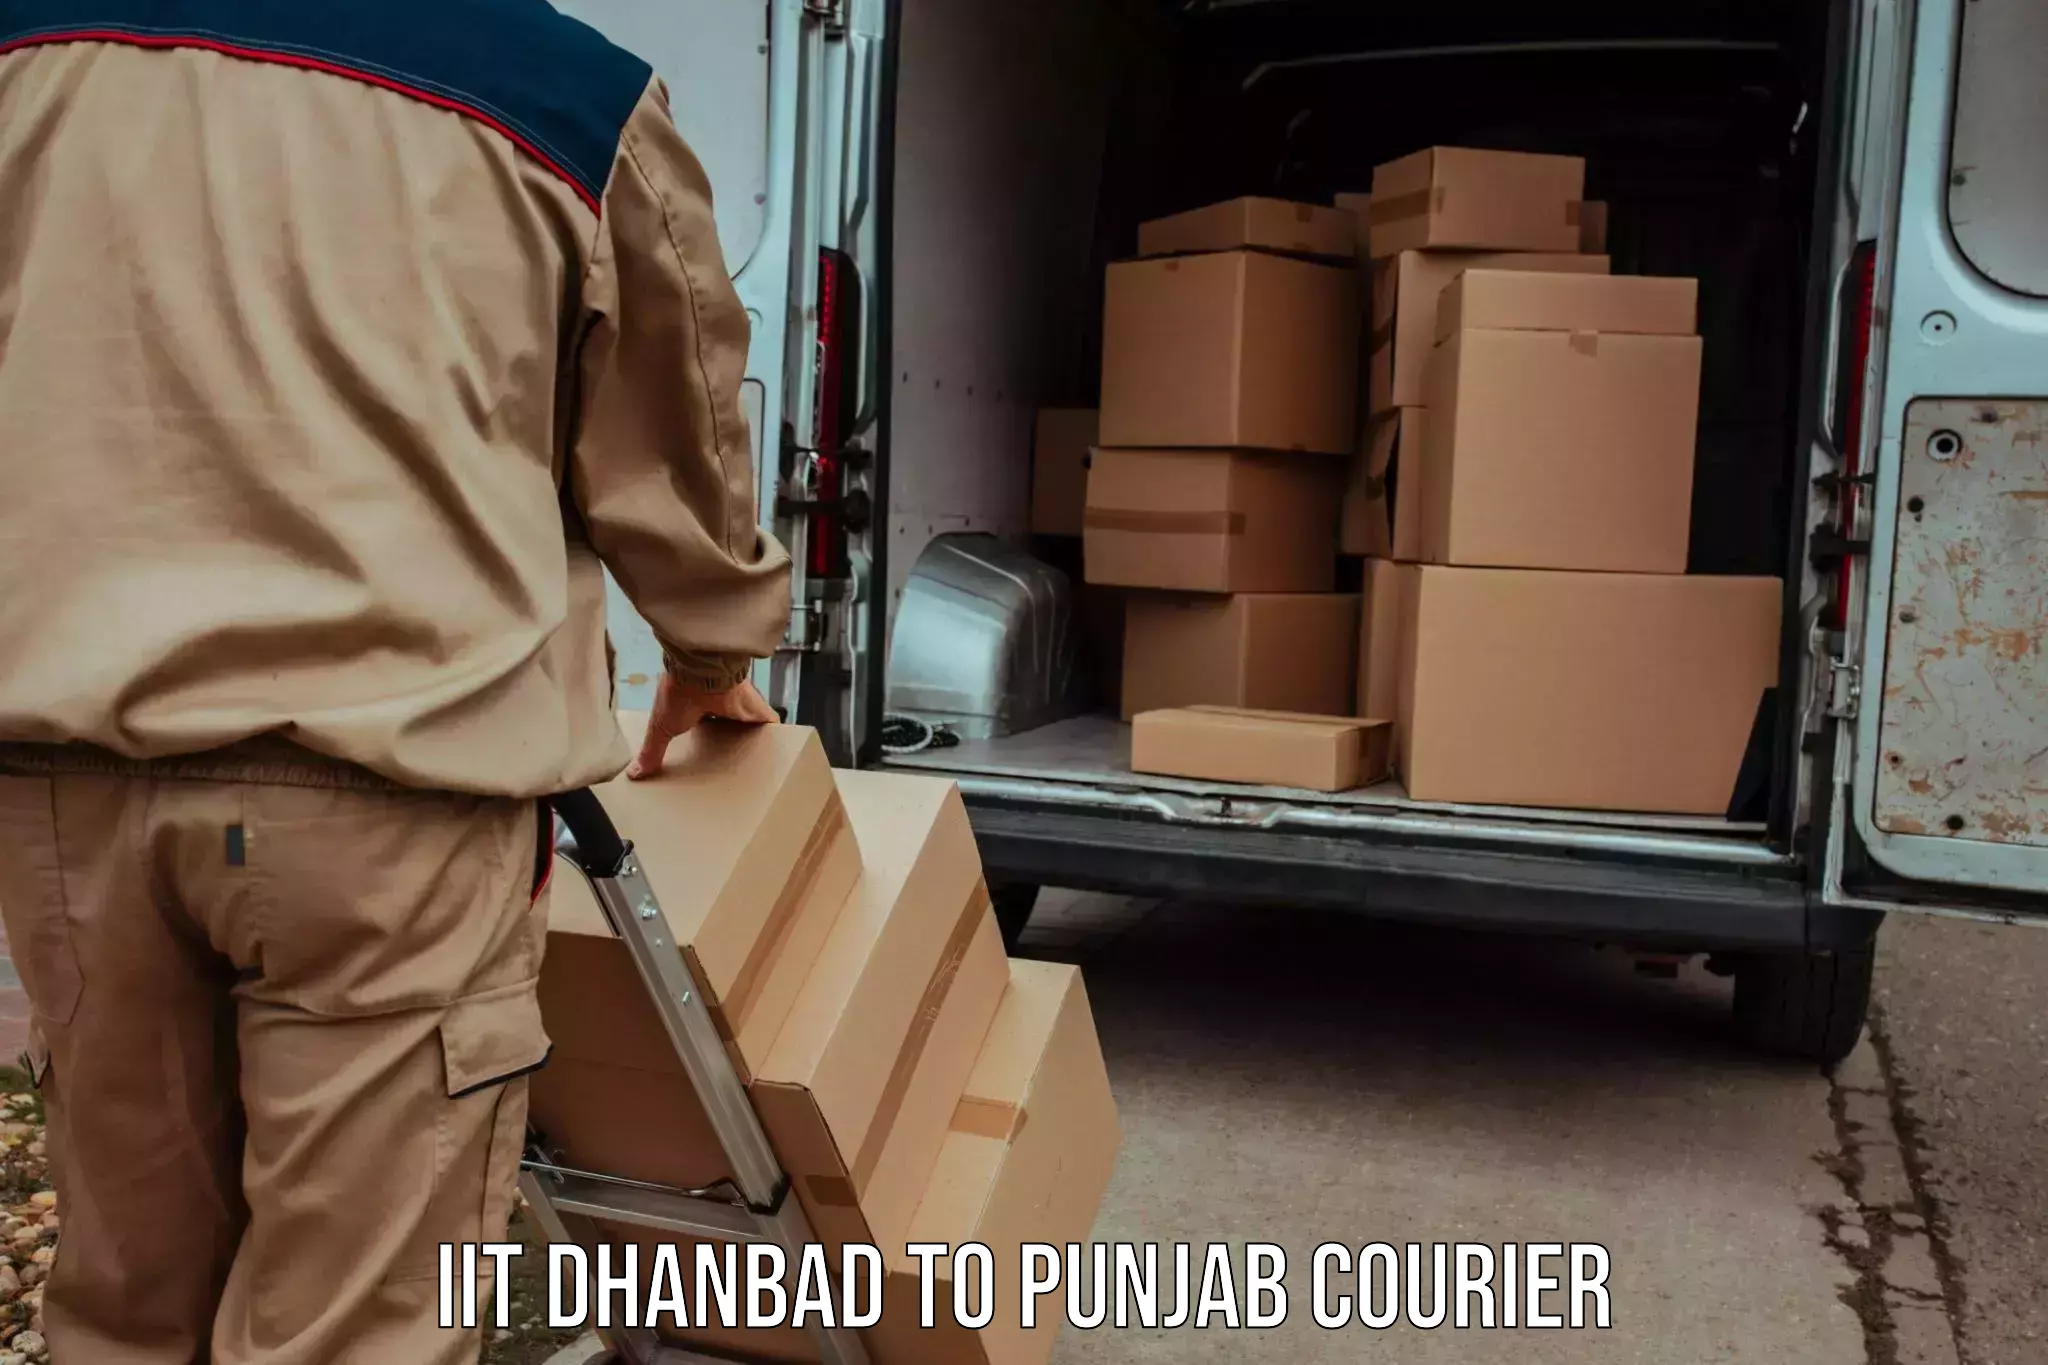 Courier service booking IIT Dhanbad to Sunam